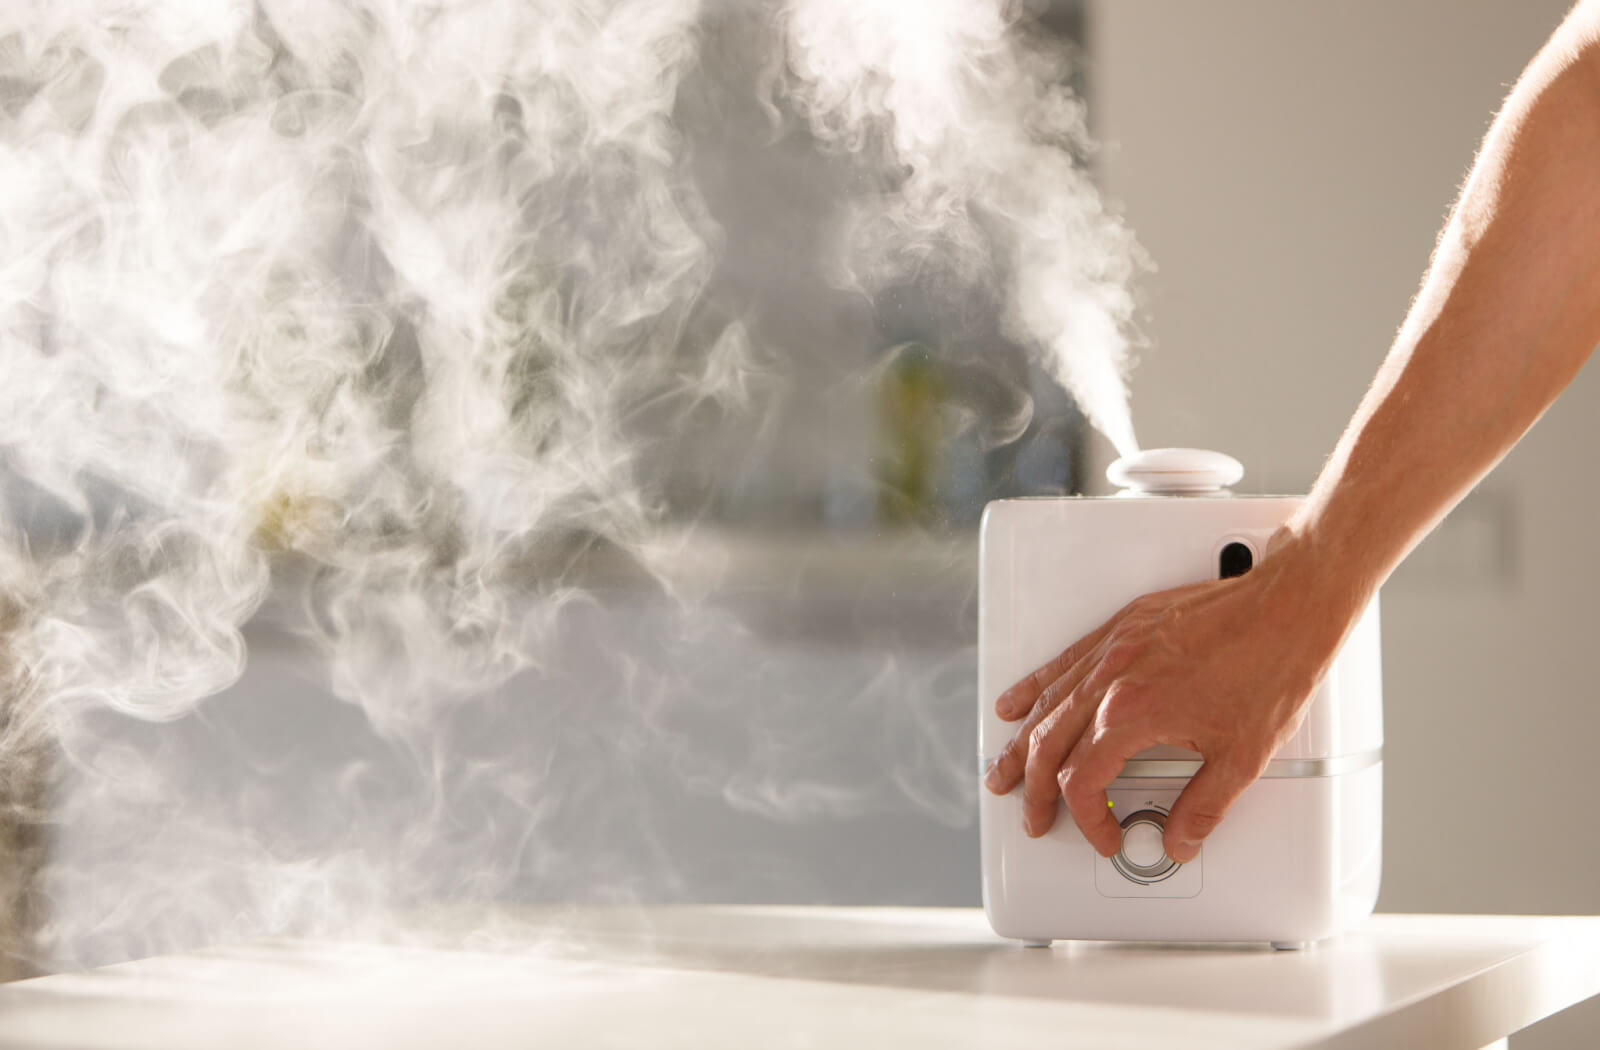 a hand reaches into the screen turns up a setting on a humidifier to attempt dry eye relief